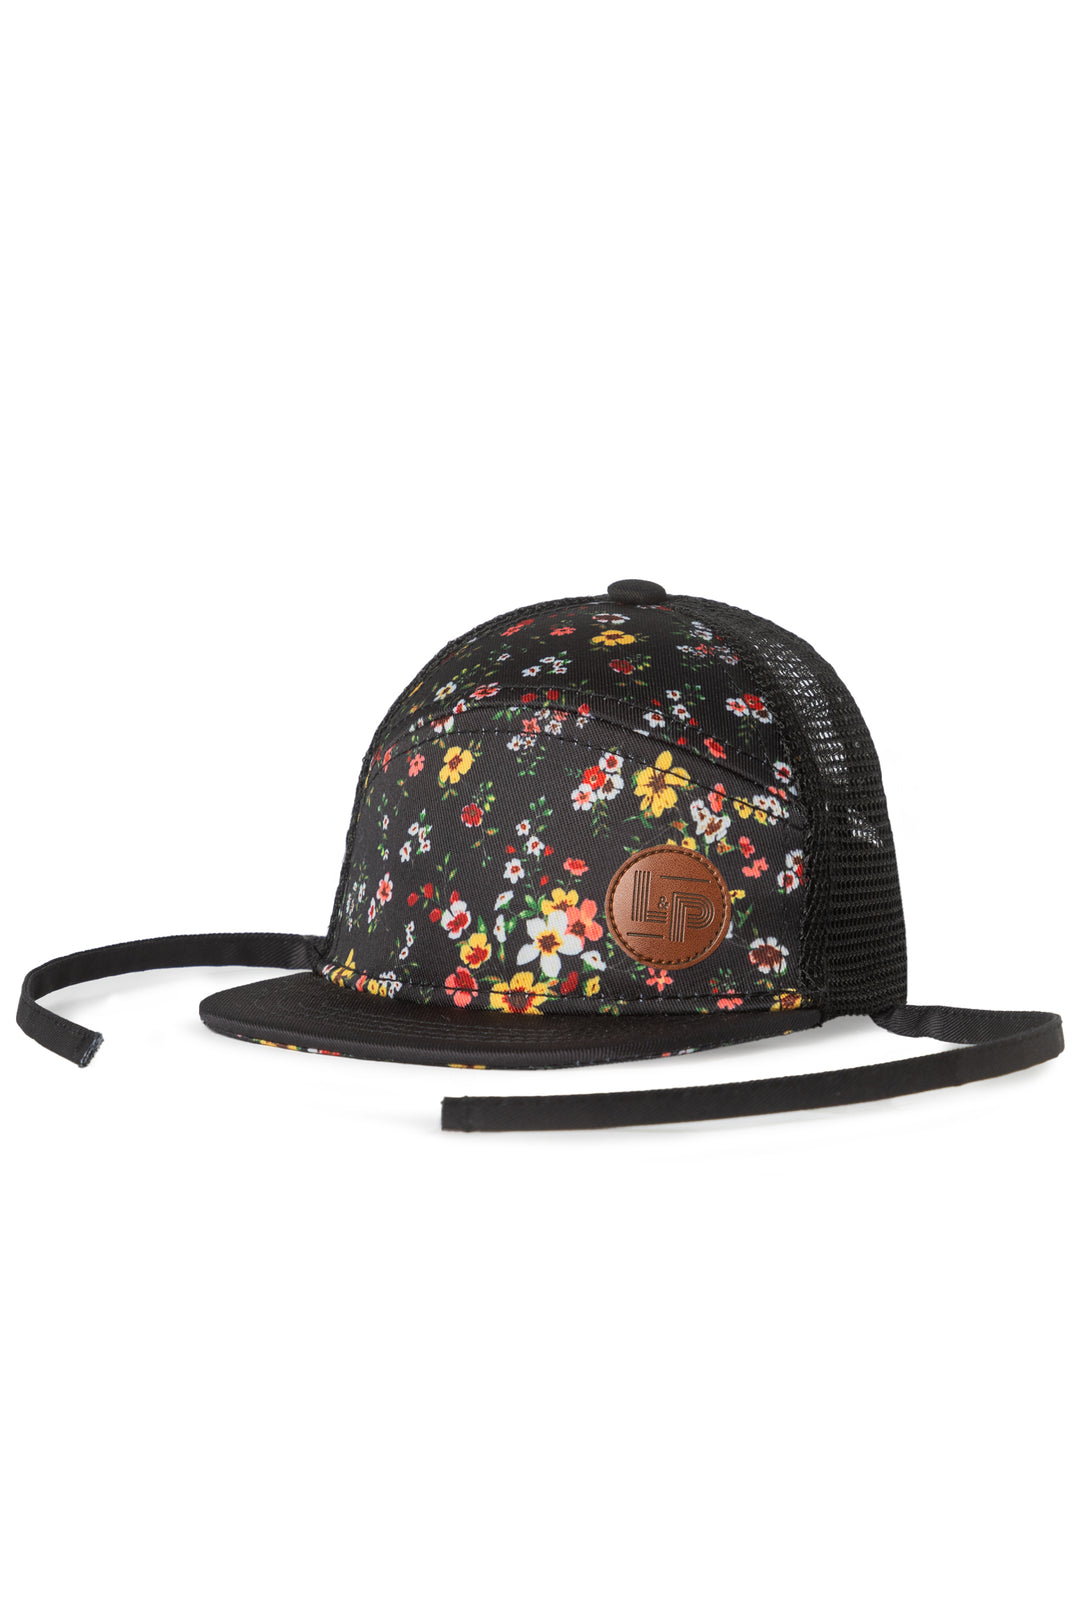 Florence Mesh Cap - Fit Legendary [Baby]